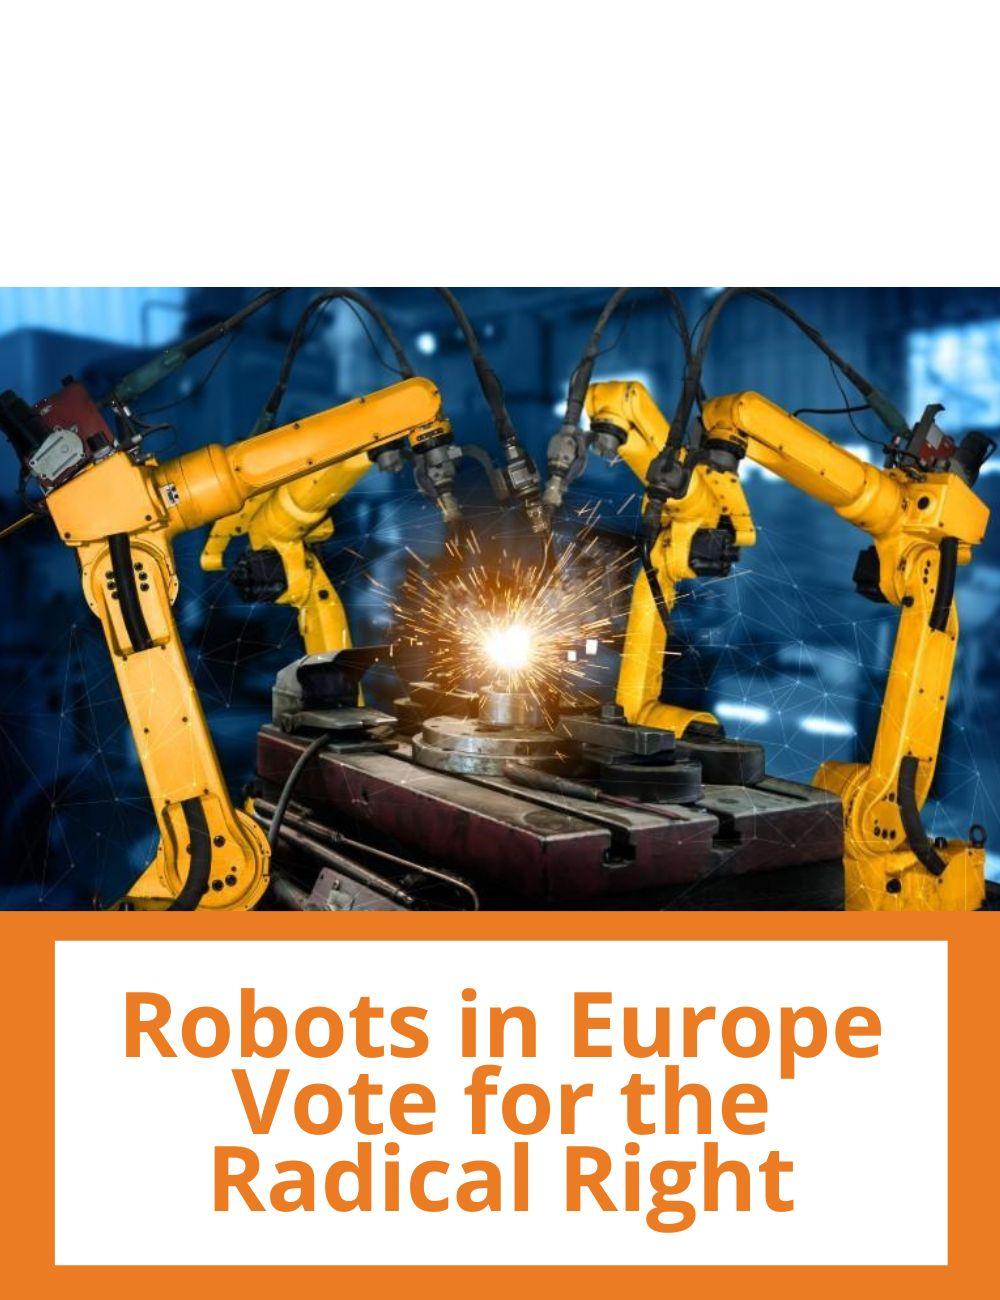 Link to related stories. Image: industrial robots. Story headline: Robots in Europe Vote for the Radical Right